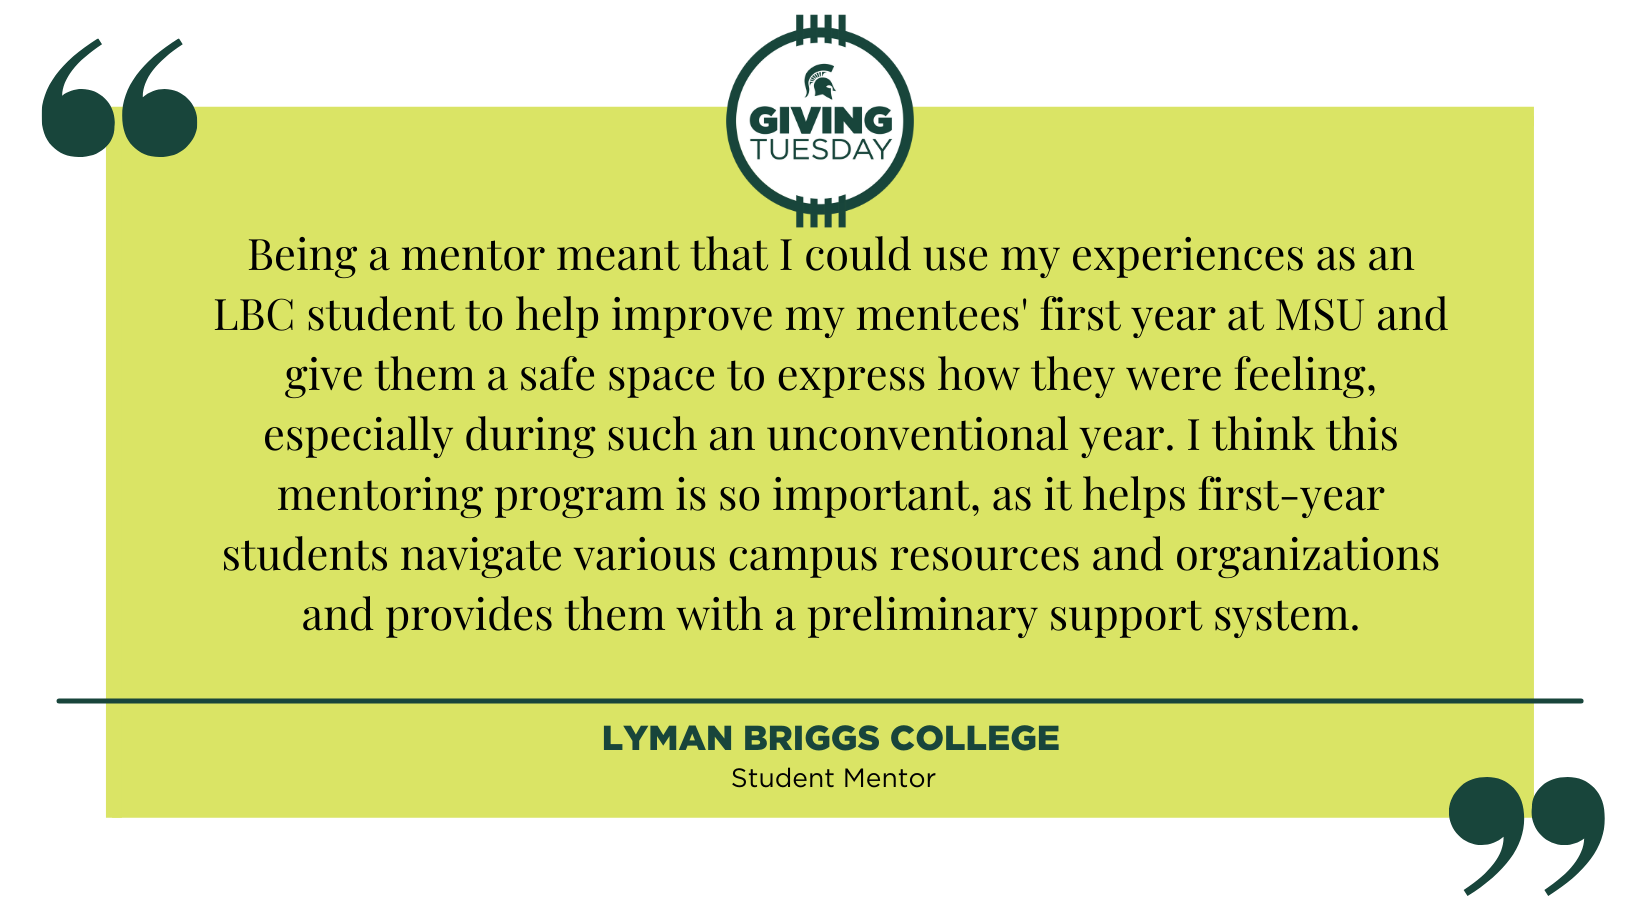 Quote from LBC mentor on how important mentoring is to first-year students especially during the pandemic